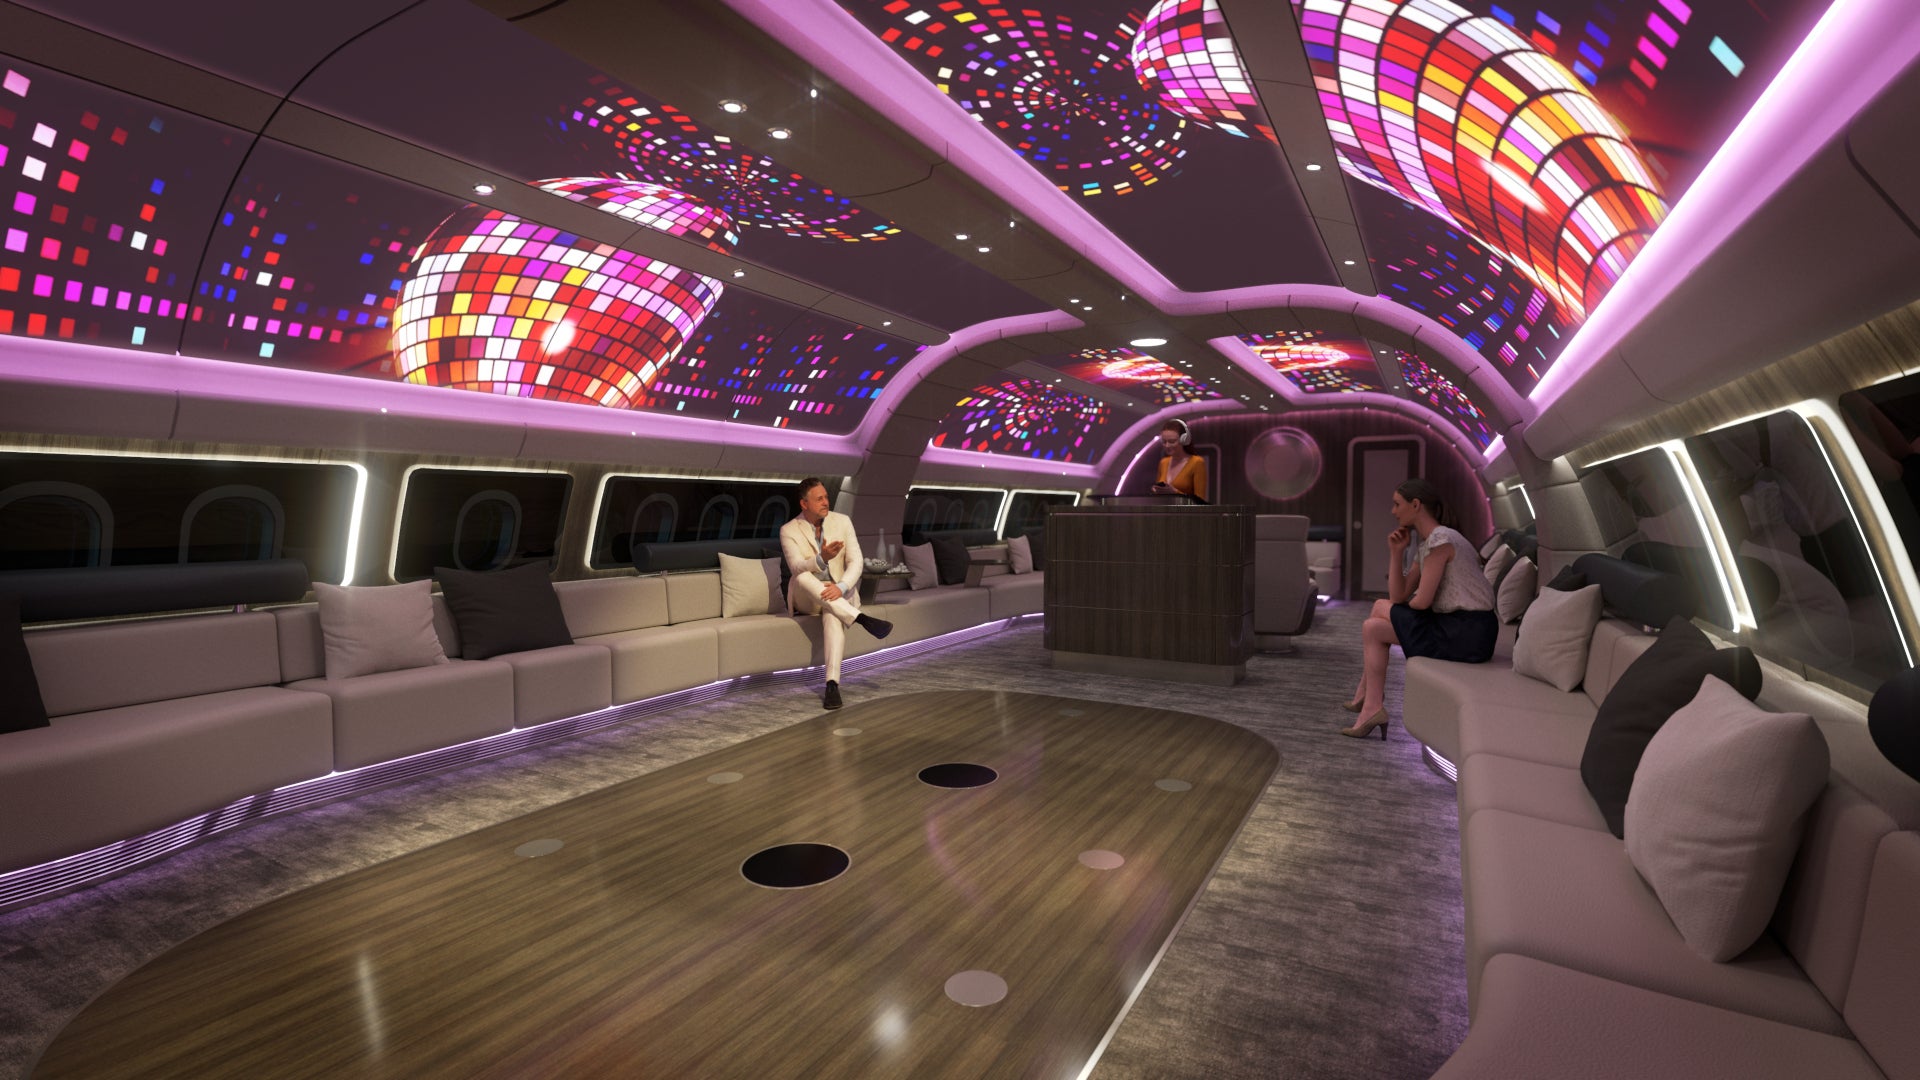 This Ridiculous $350 Million Luxury Jet Concept Has A Balcony And Disco